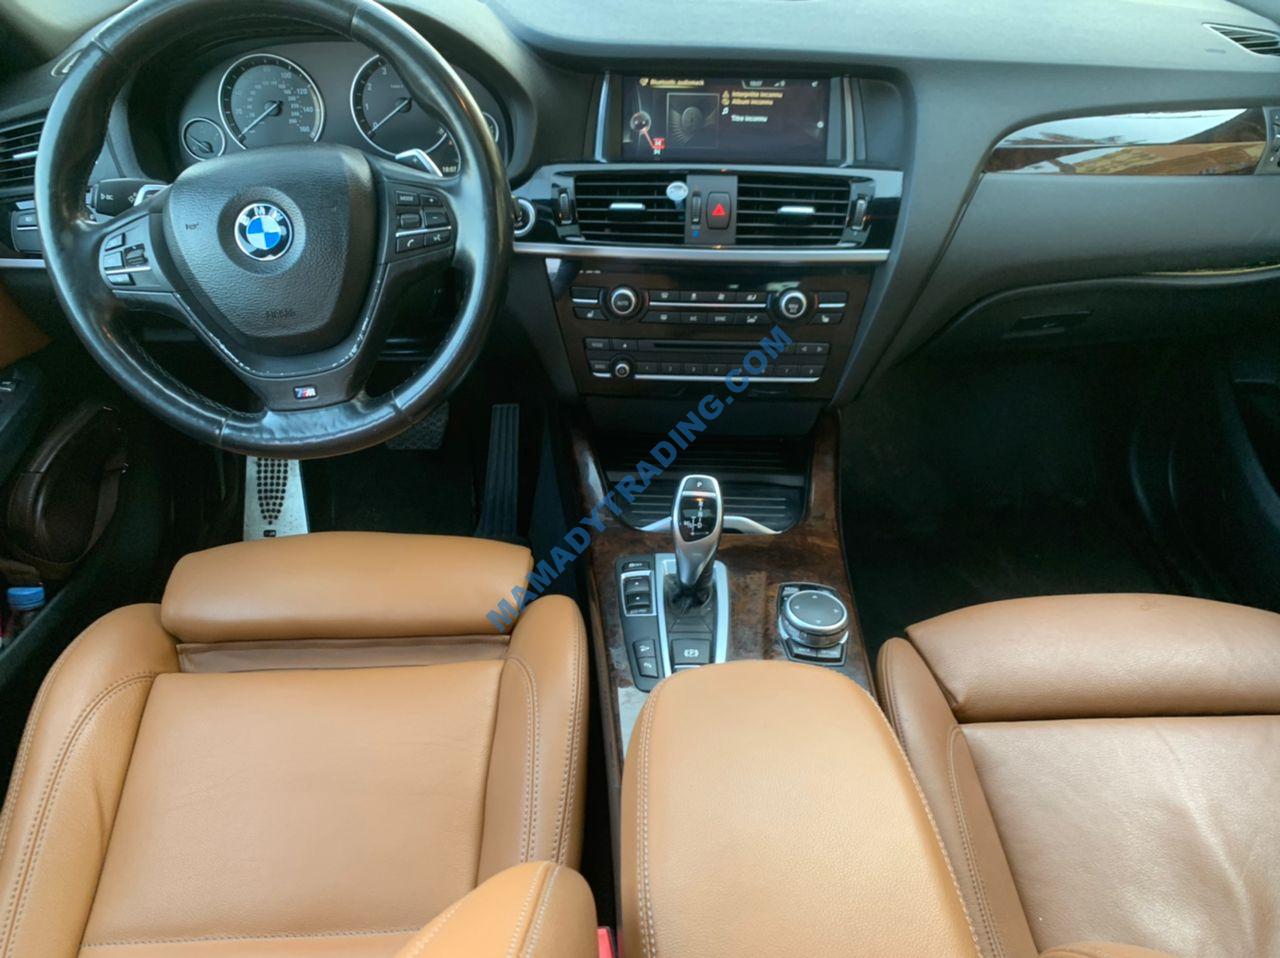 BMW X4 XDRIVE Pack M 4 Cylindres 2015 Full Options